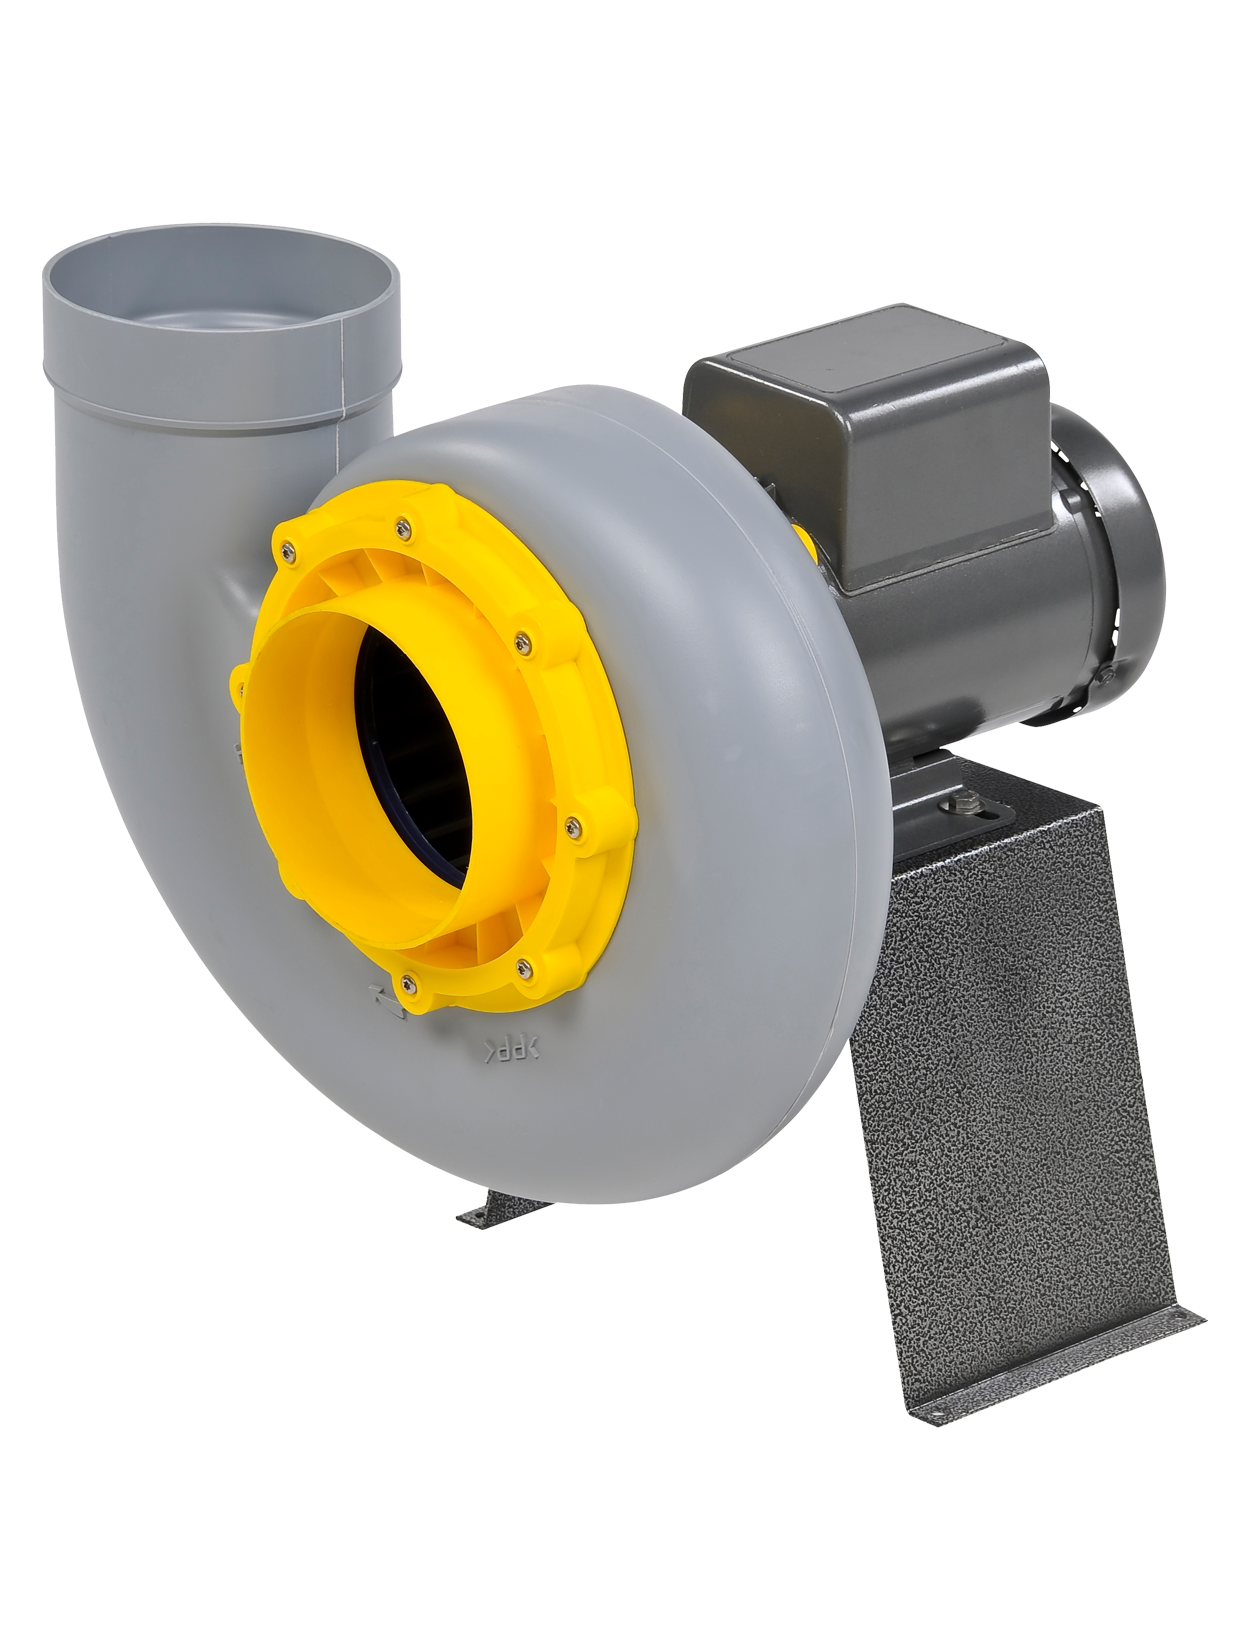 Plastec 20 Direct Drive Forward Curve Polypropylene Blower for exhausting toxic fumes in chemically corrosive environments